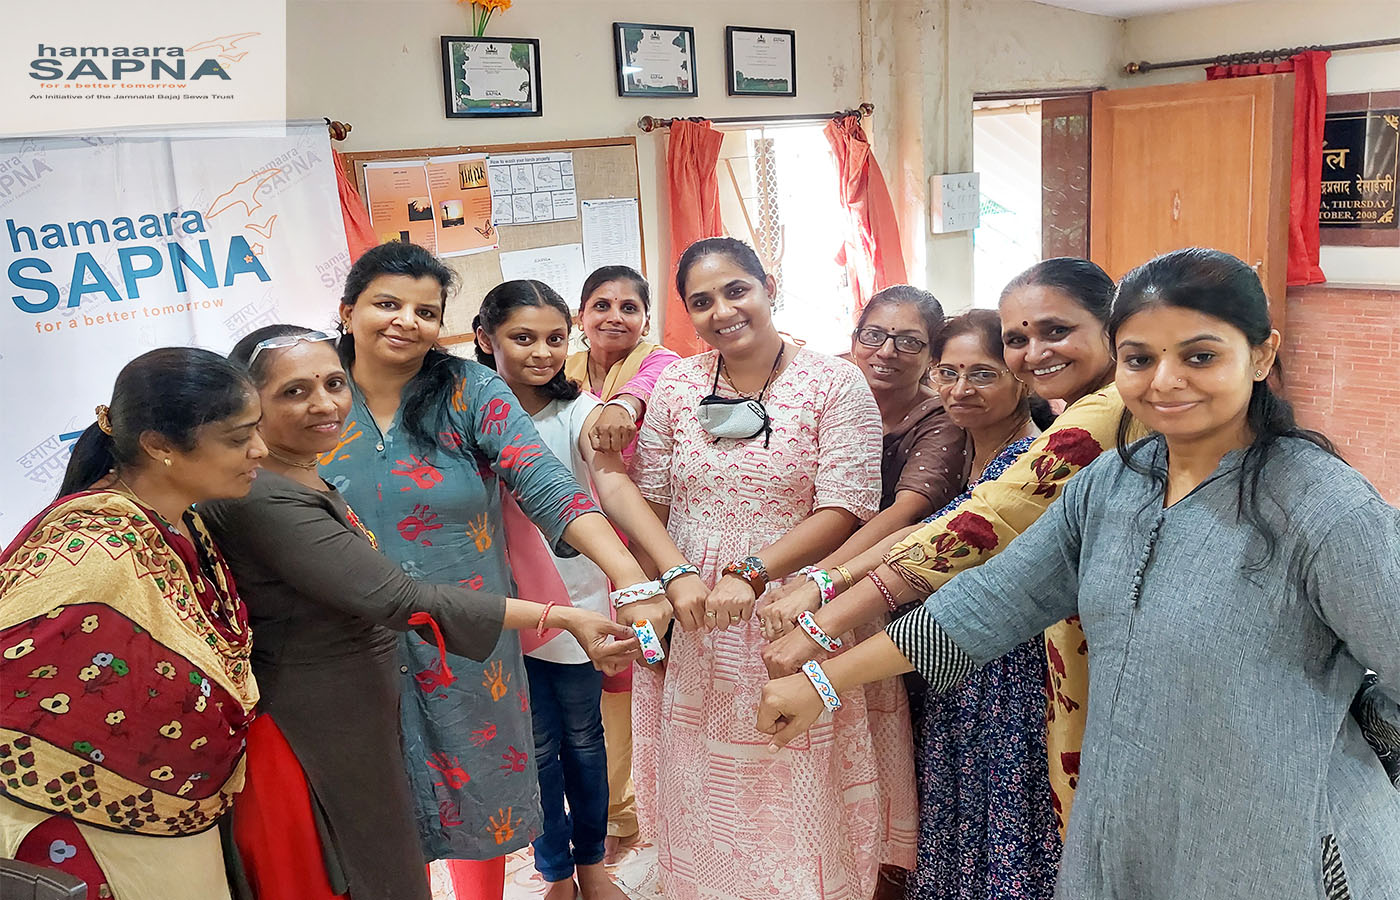 Beneficiaries were taught beautiful flower patterns to make their own clay bangles. Each bangle showcased one's creativity and talent